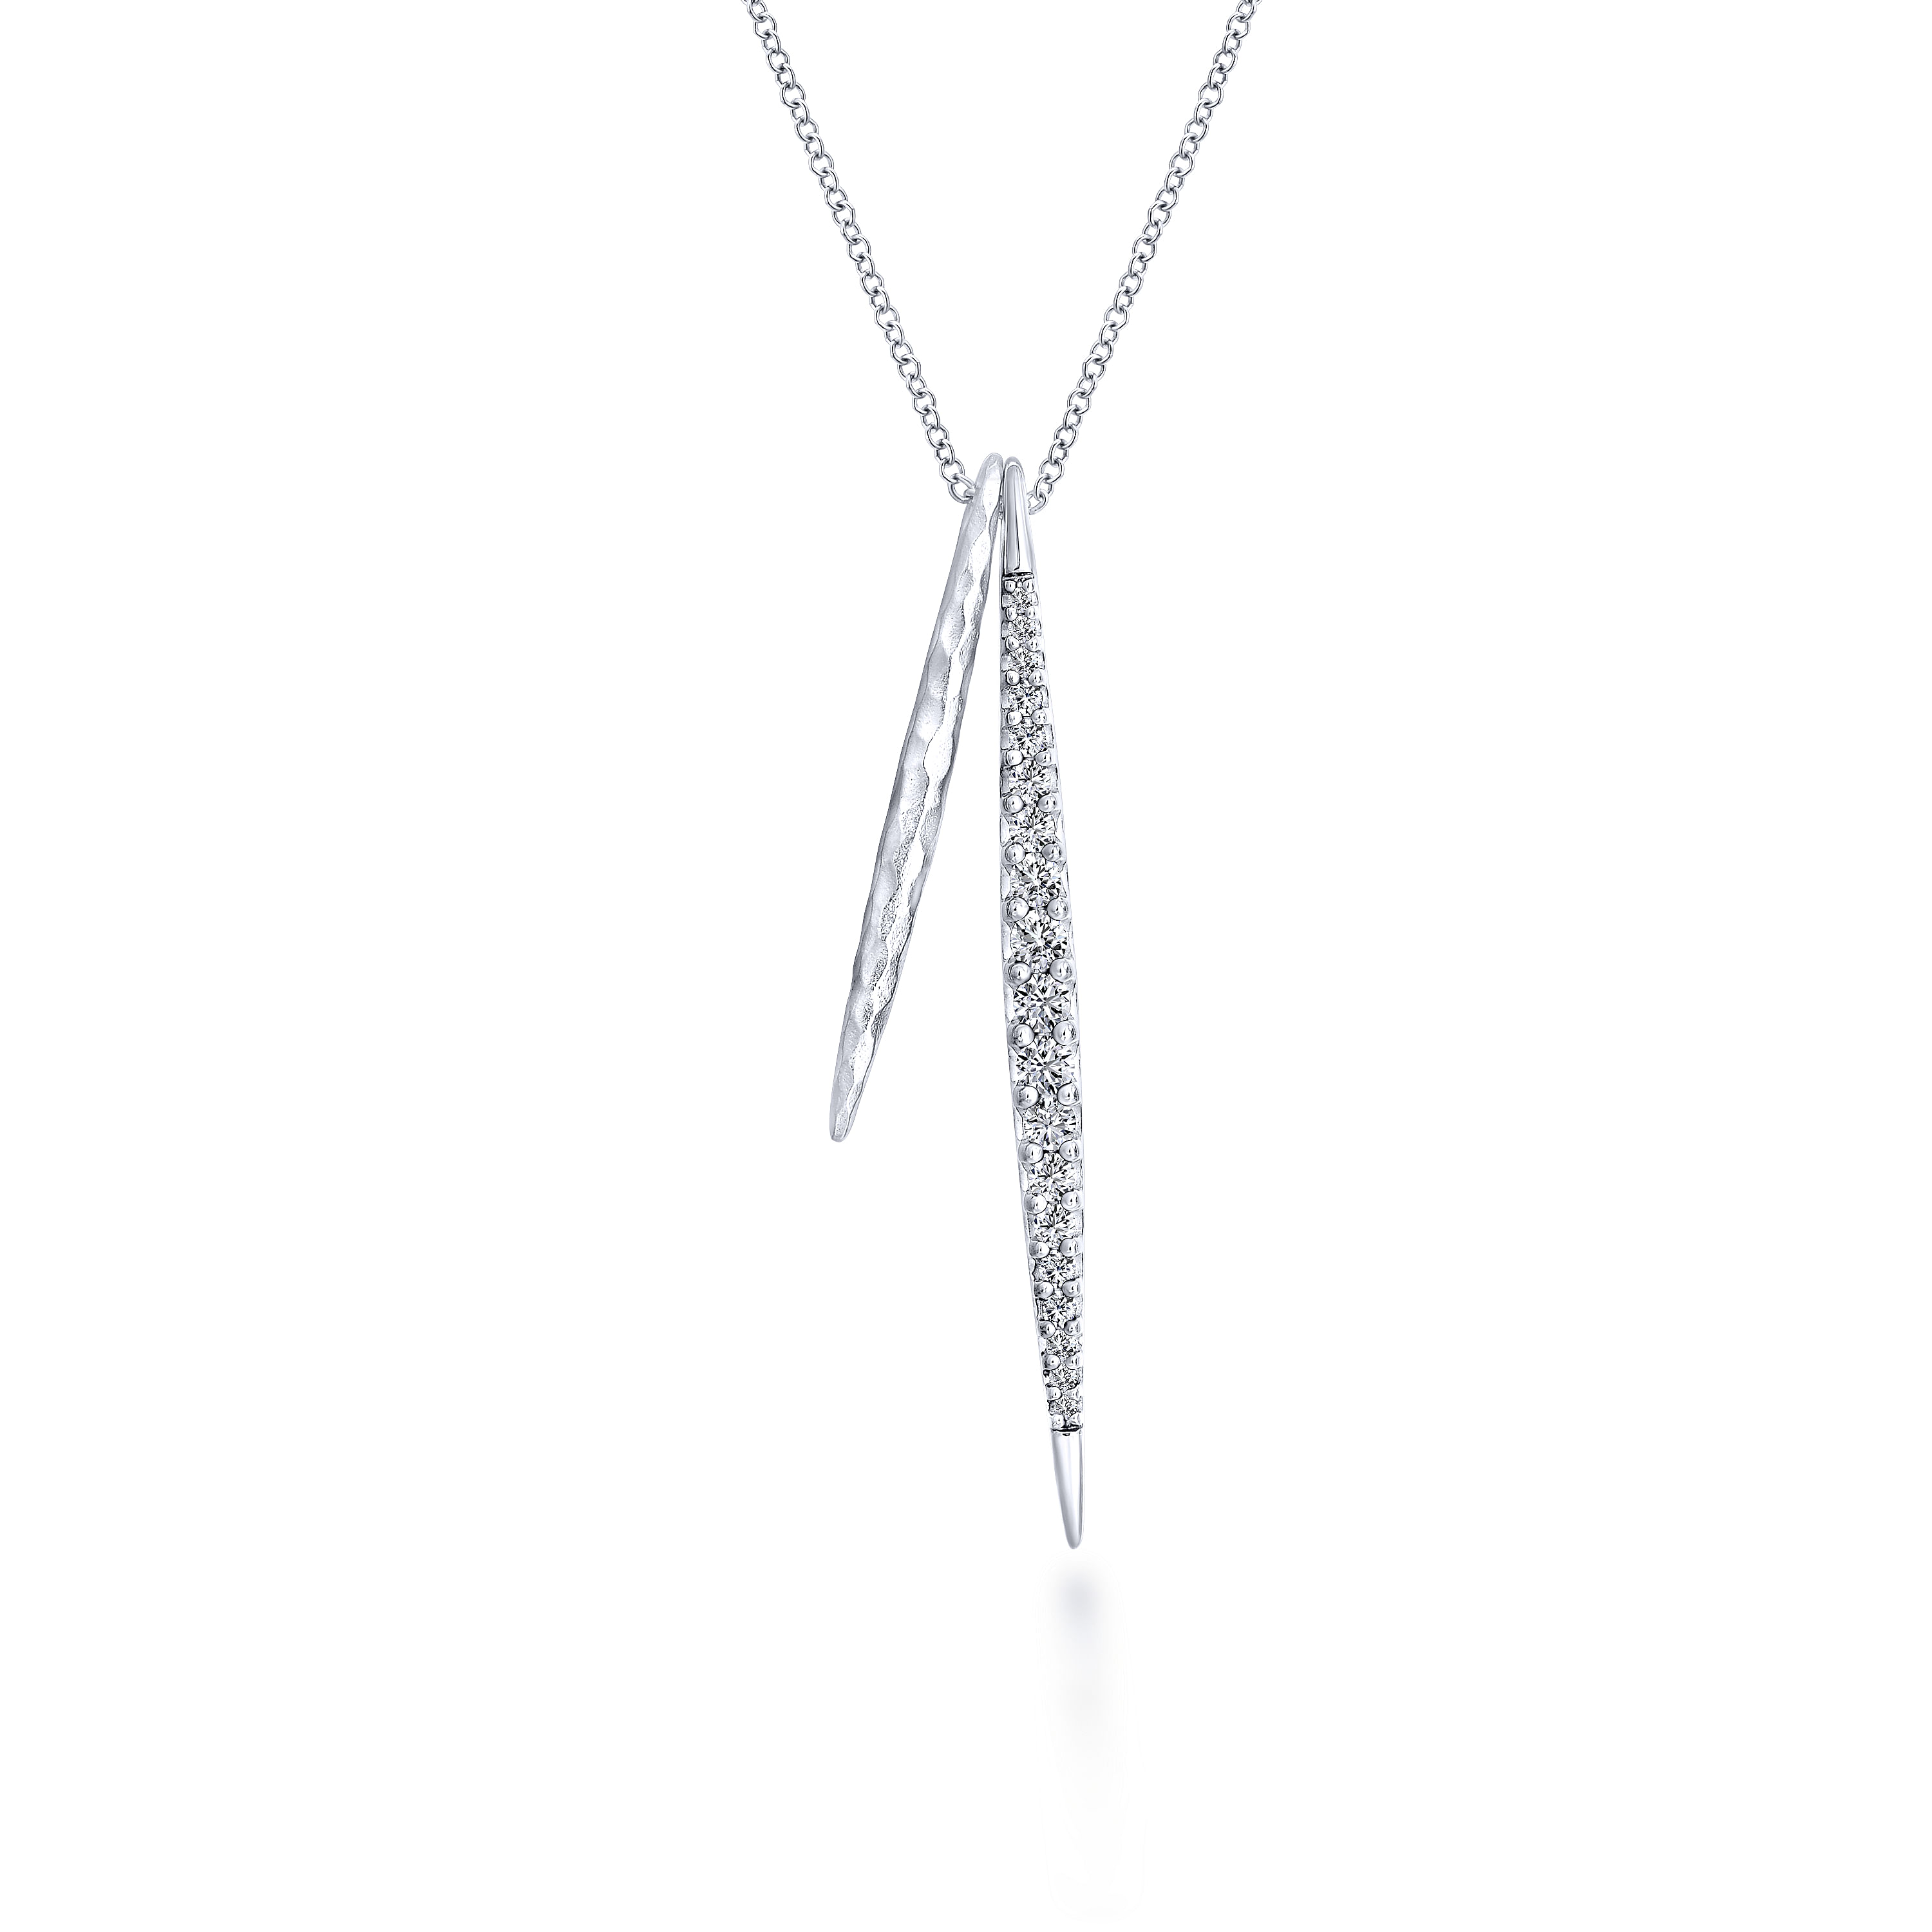 25 inch Hammered 925 Sterling Silver White Sapphire Double Spike Necklace